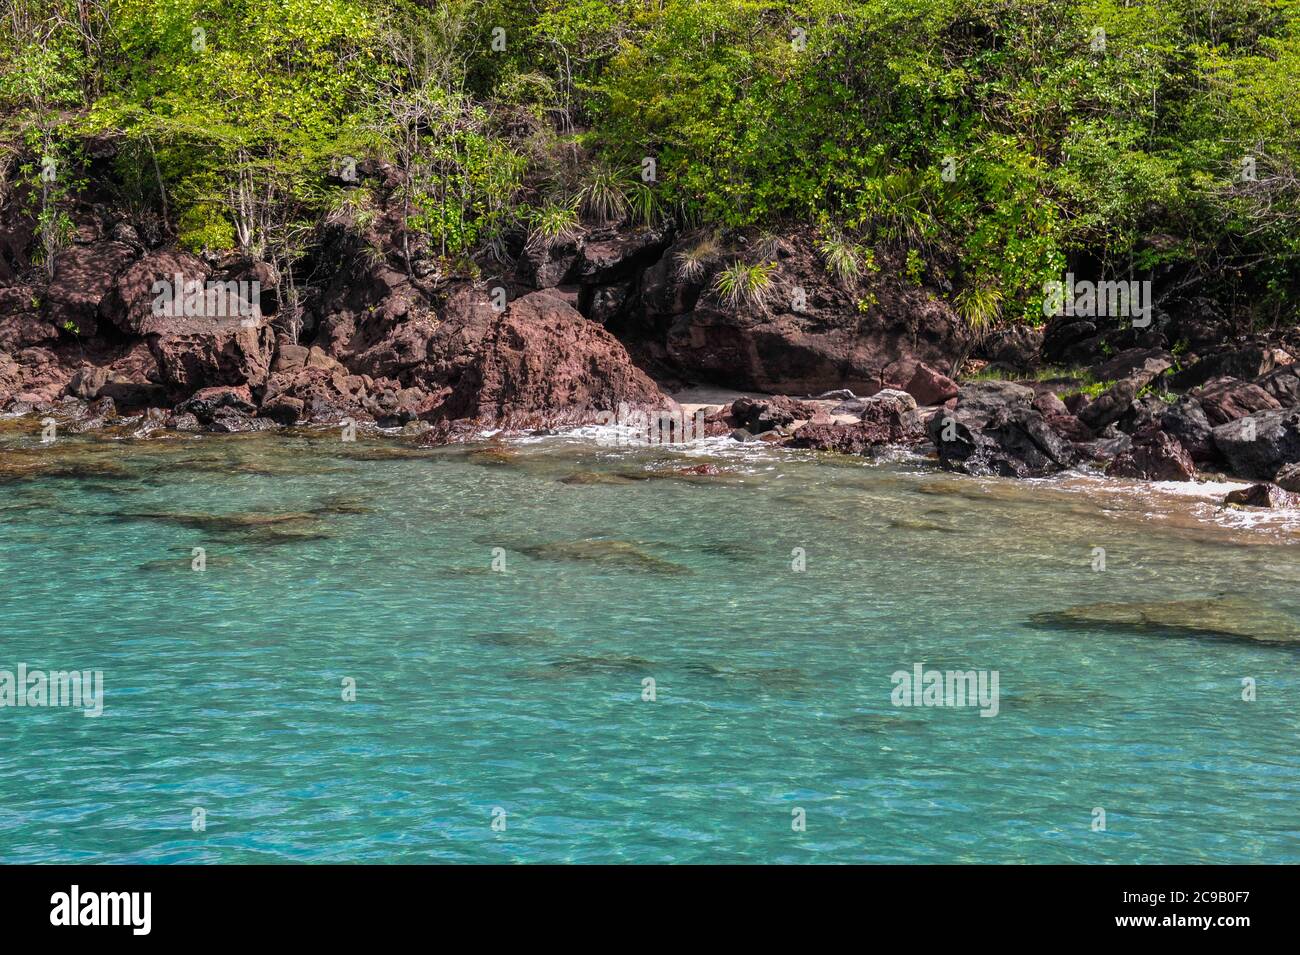 Pristine crystal clear sea on rocky beach with wild vegetation in the background, Guadelupe Stock Photo